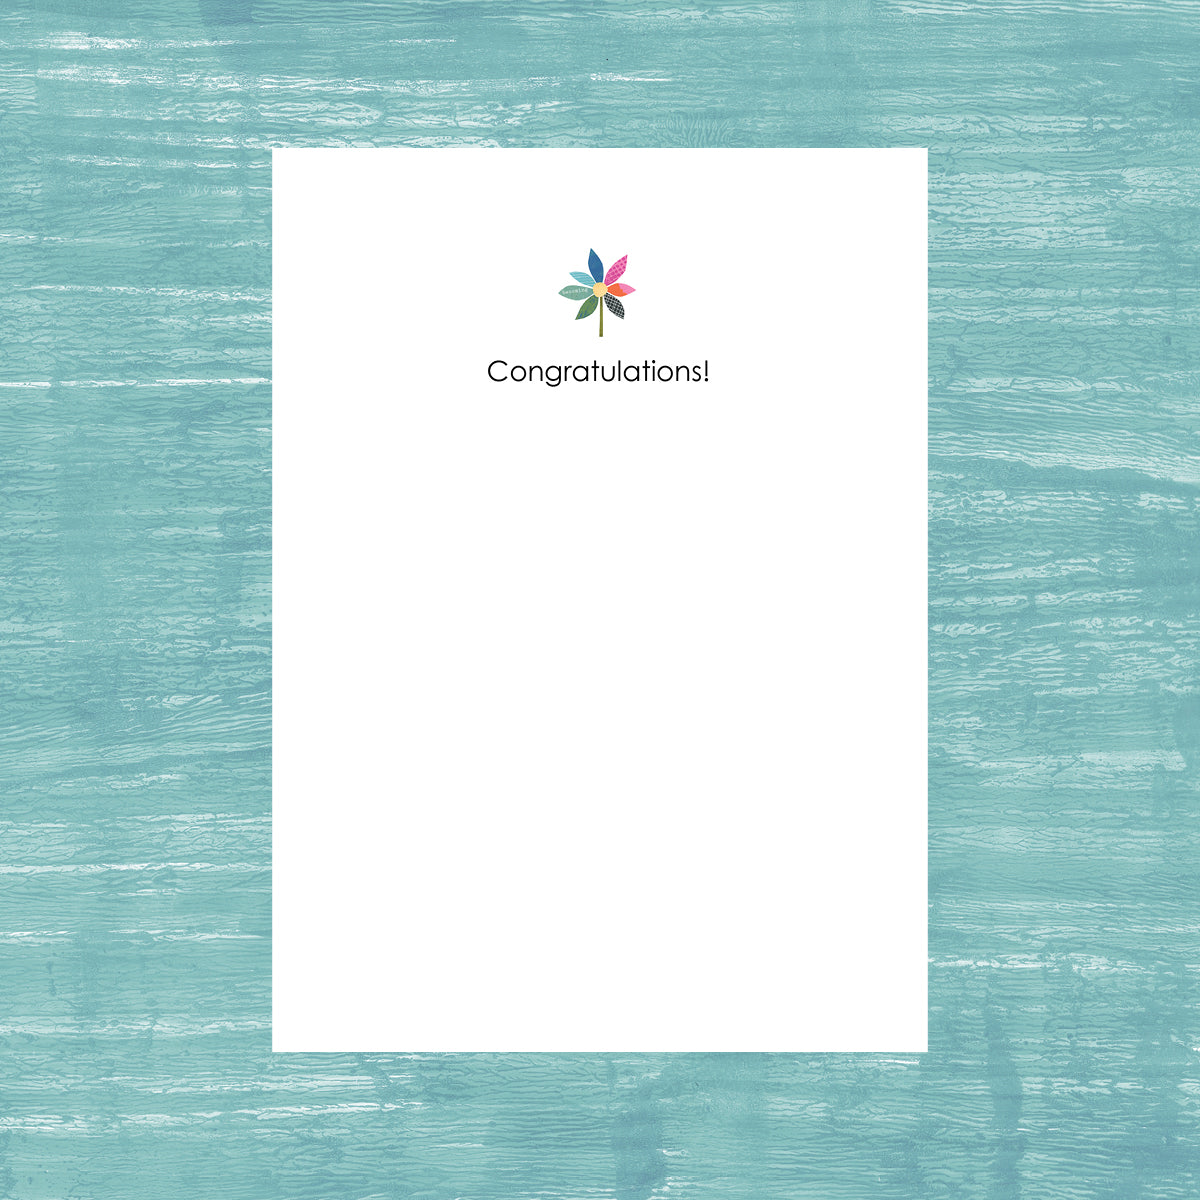 You Did It! - Greeting Card